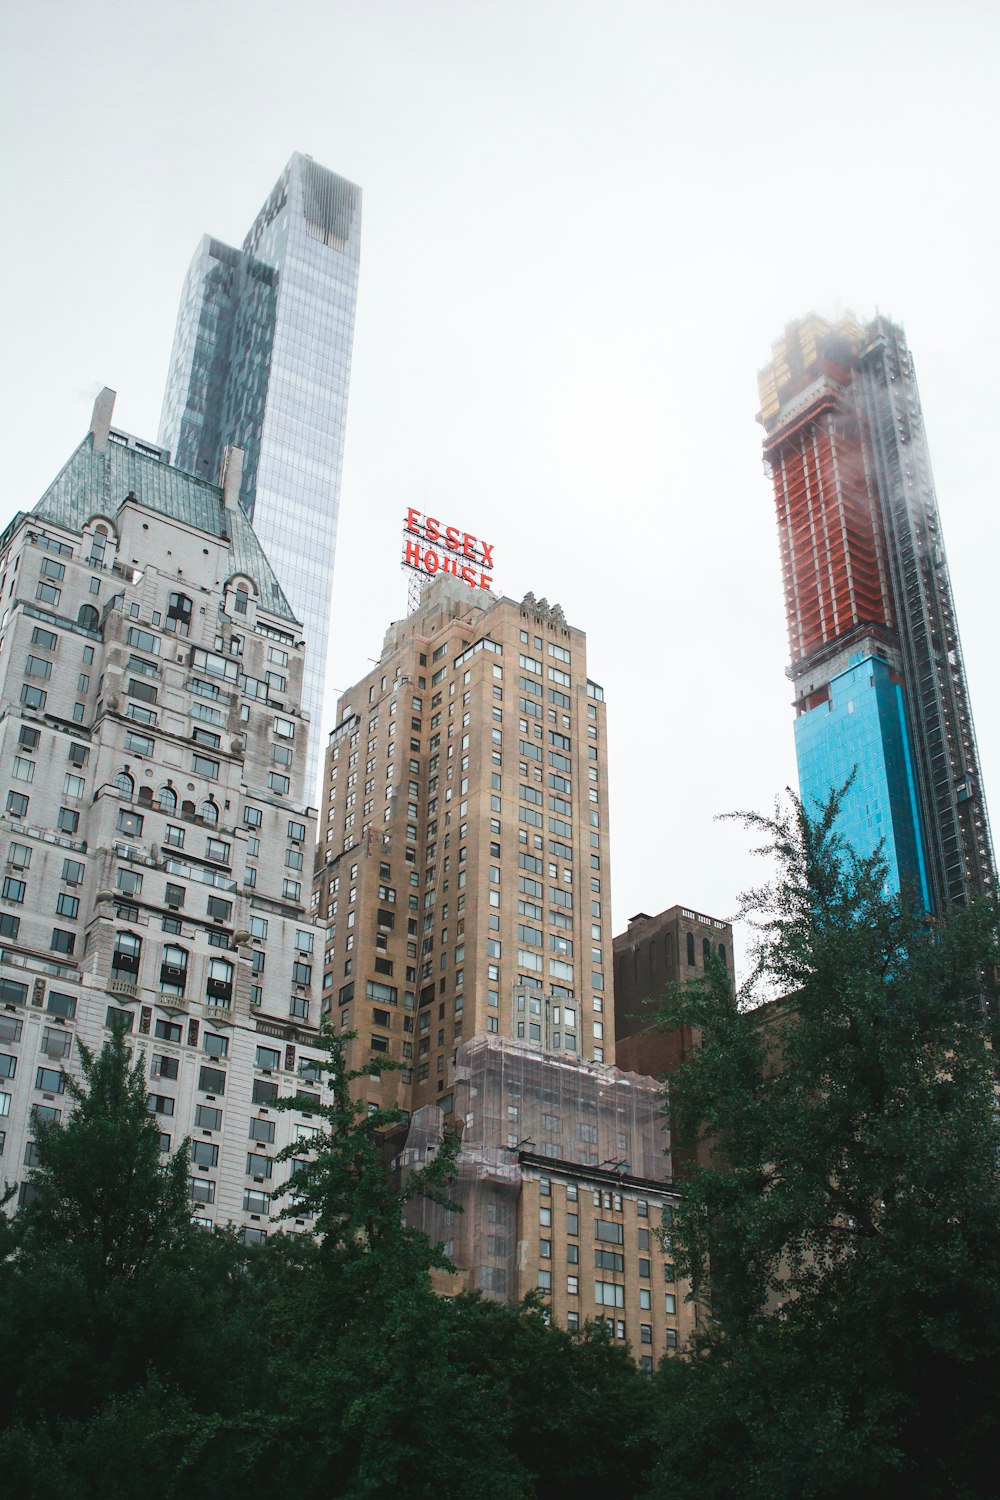 low-angle photography of high rise buildings